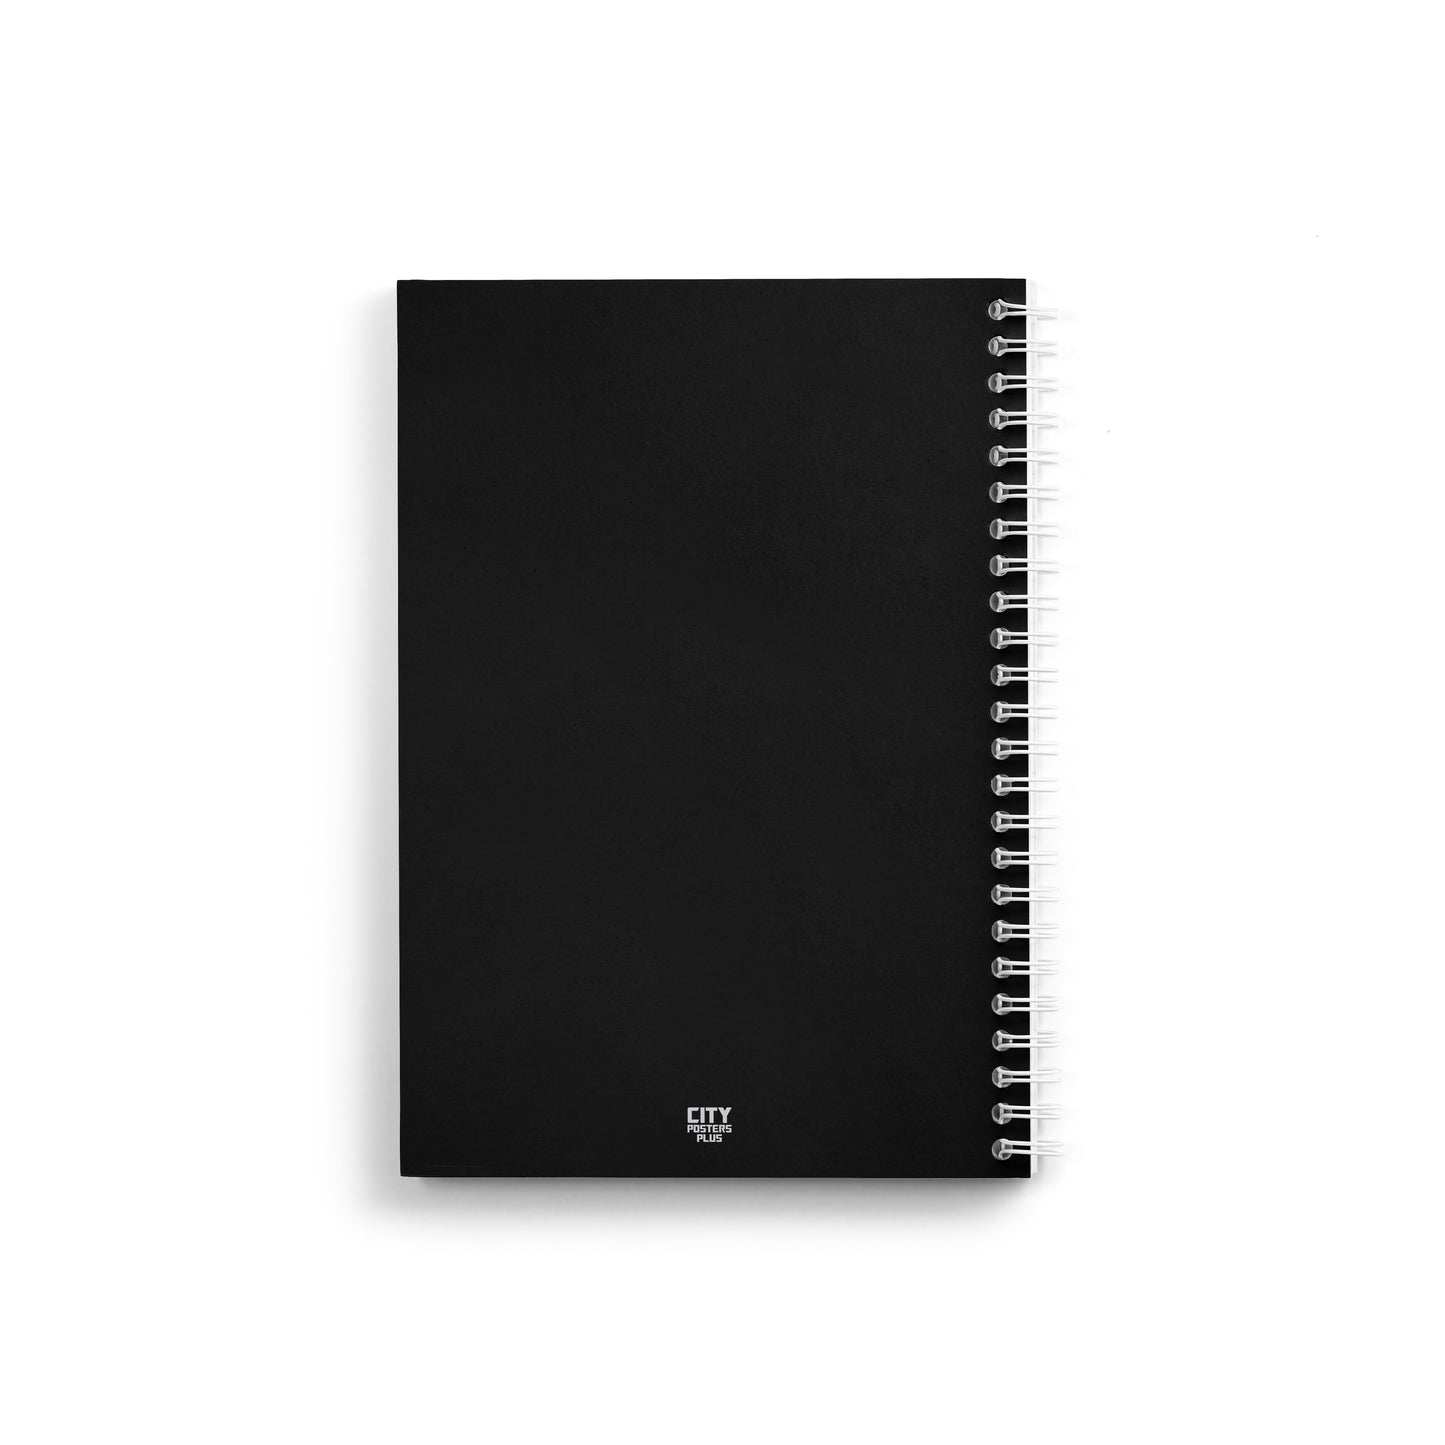 Abhayapuri Notebook (A5 Size, 100 Pages, Ruled)